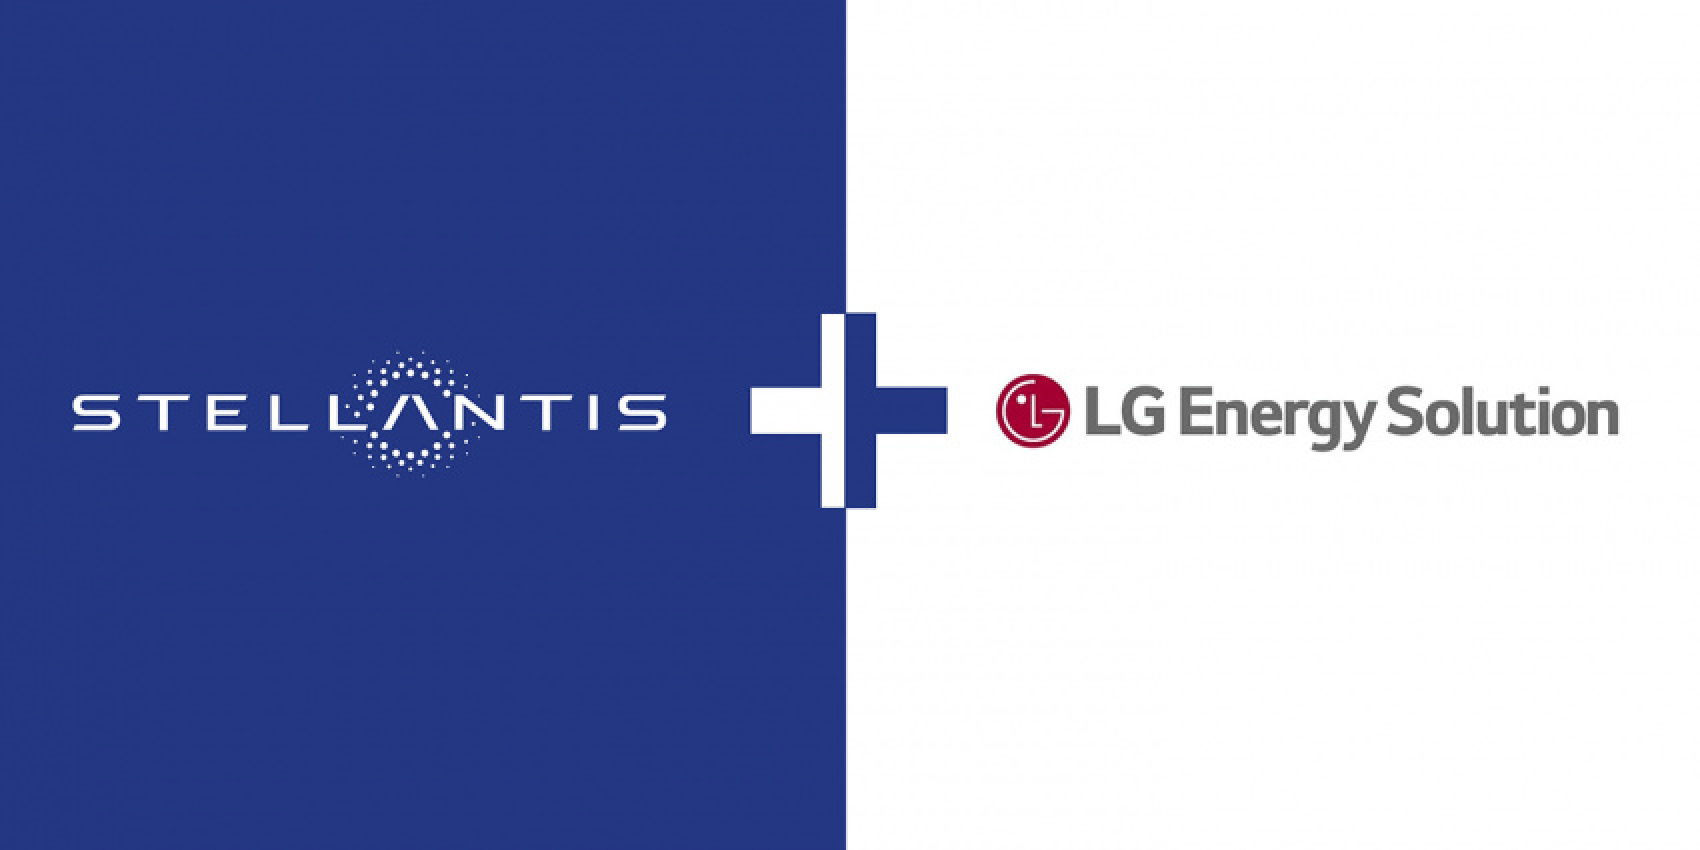 autos, battery & fuel cell, cars, electric vehicle, batteries, battery production, canada, lg energy solution, ontario, stellantis, suppliers, windsor, stellantis & lg es to build battery factory in canada